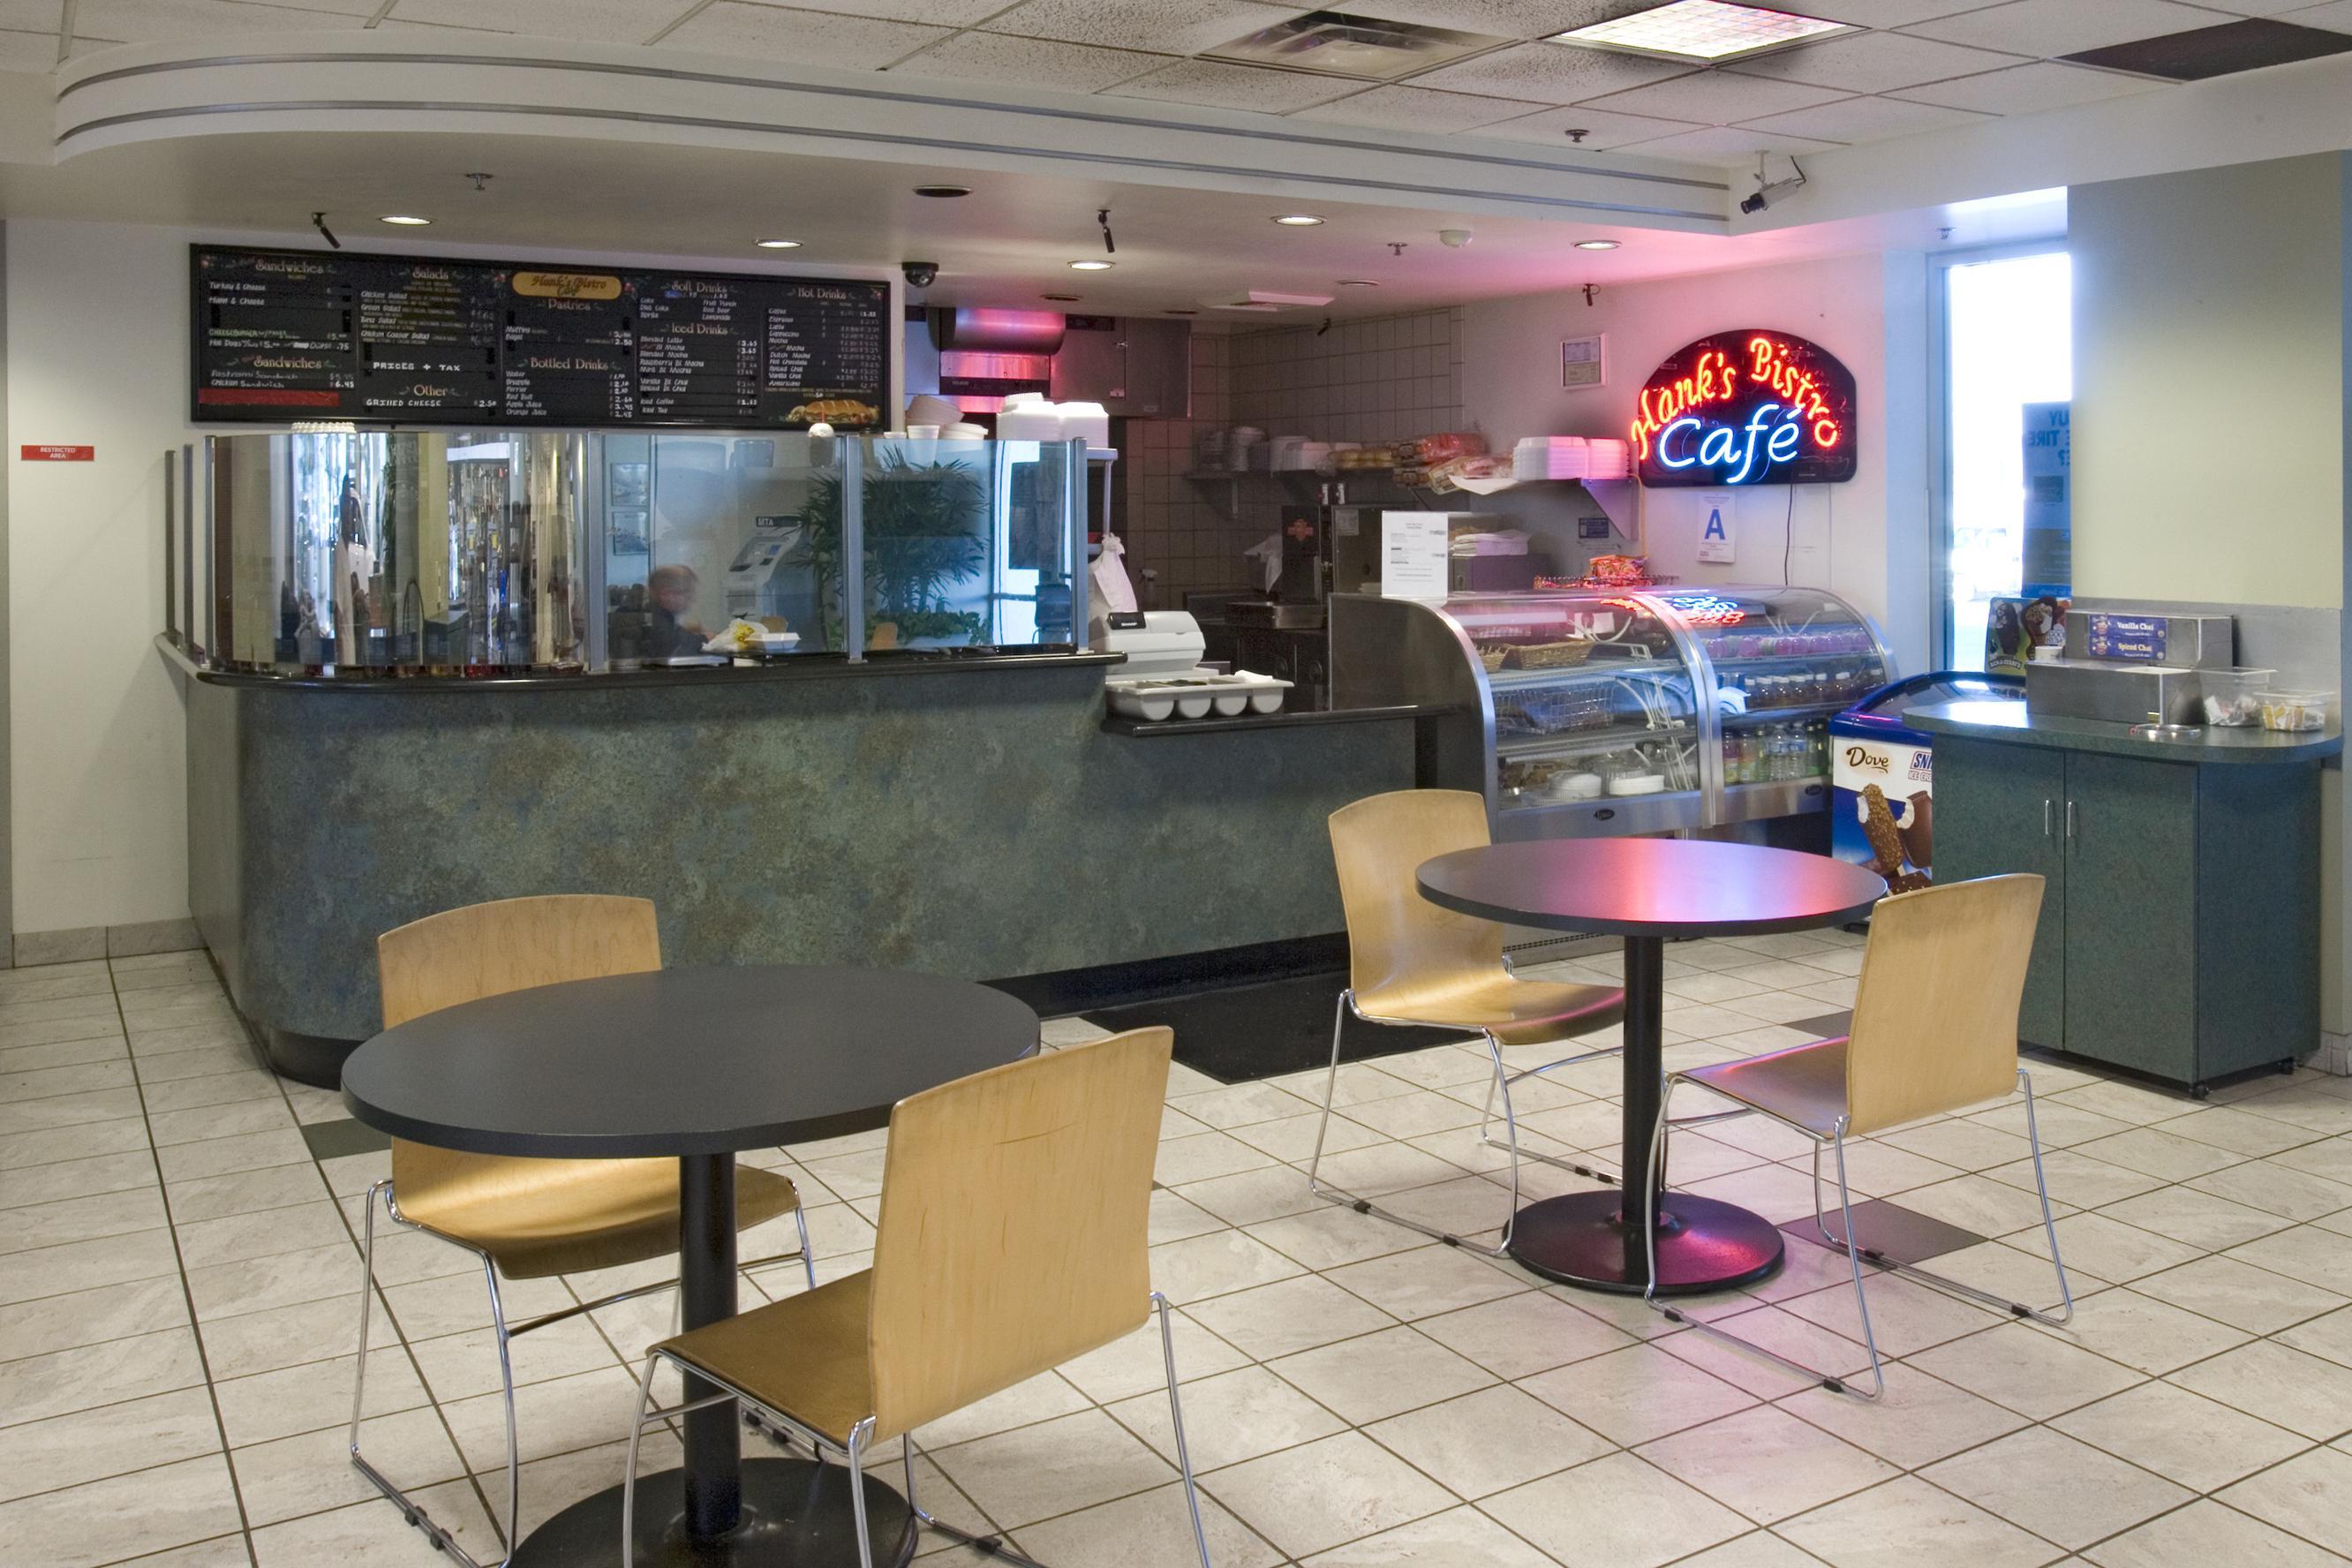 Hank's Bistro - available at South Bay Ford to customers who wait for their service